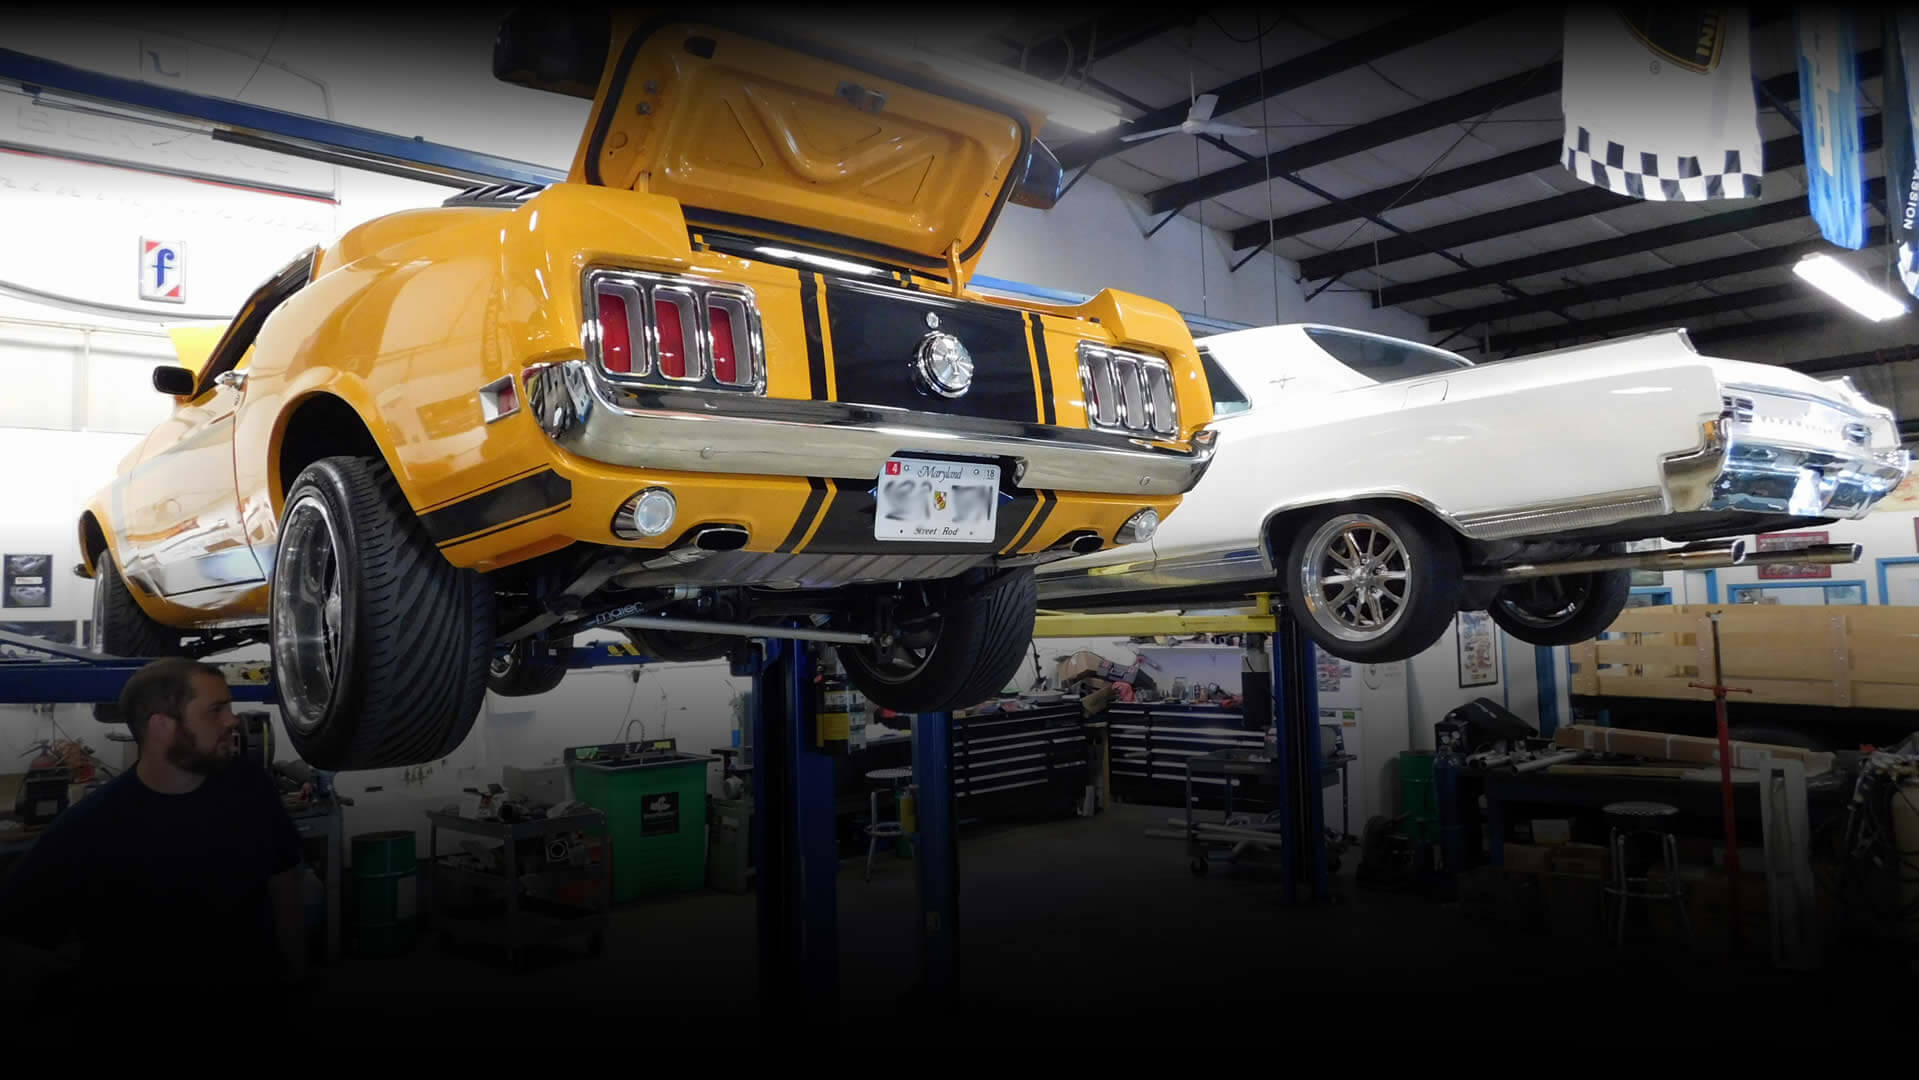 JR's Wrench Works | Oregon Wrench Works, Car Repair ... - Medford